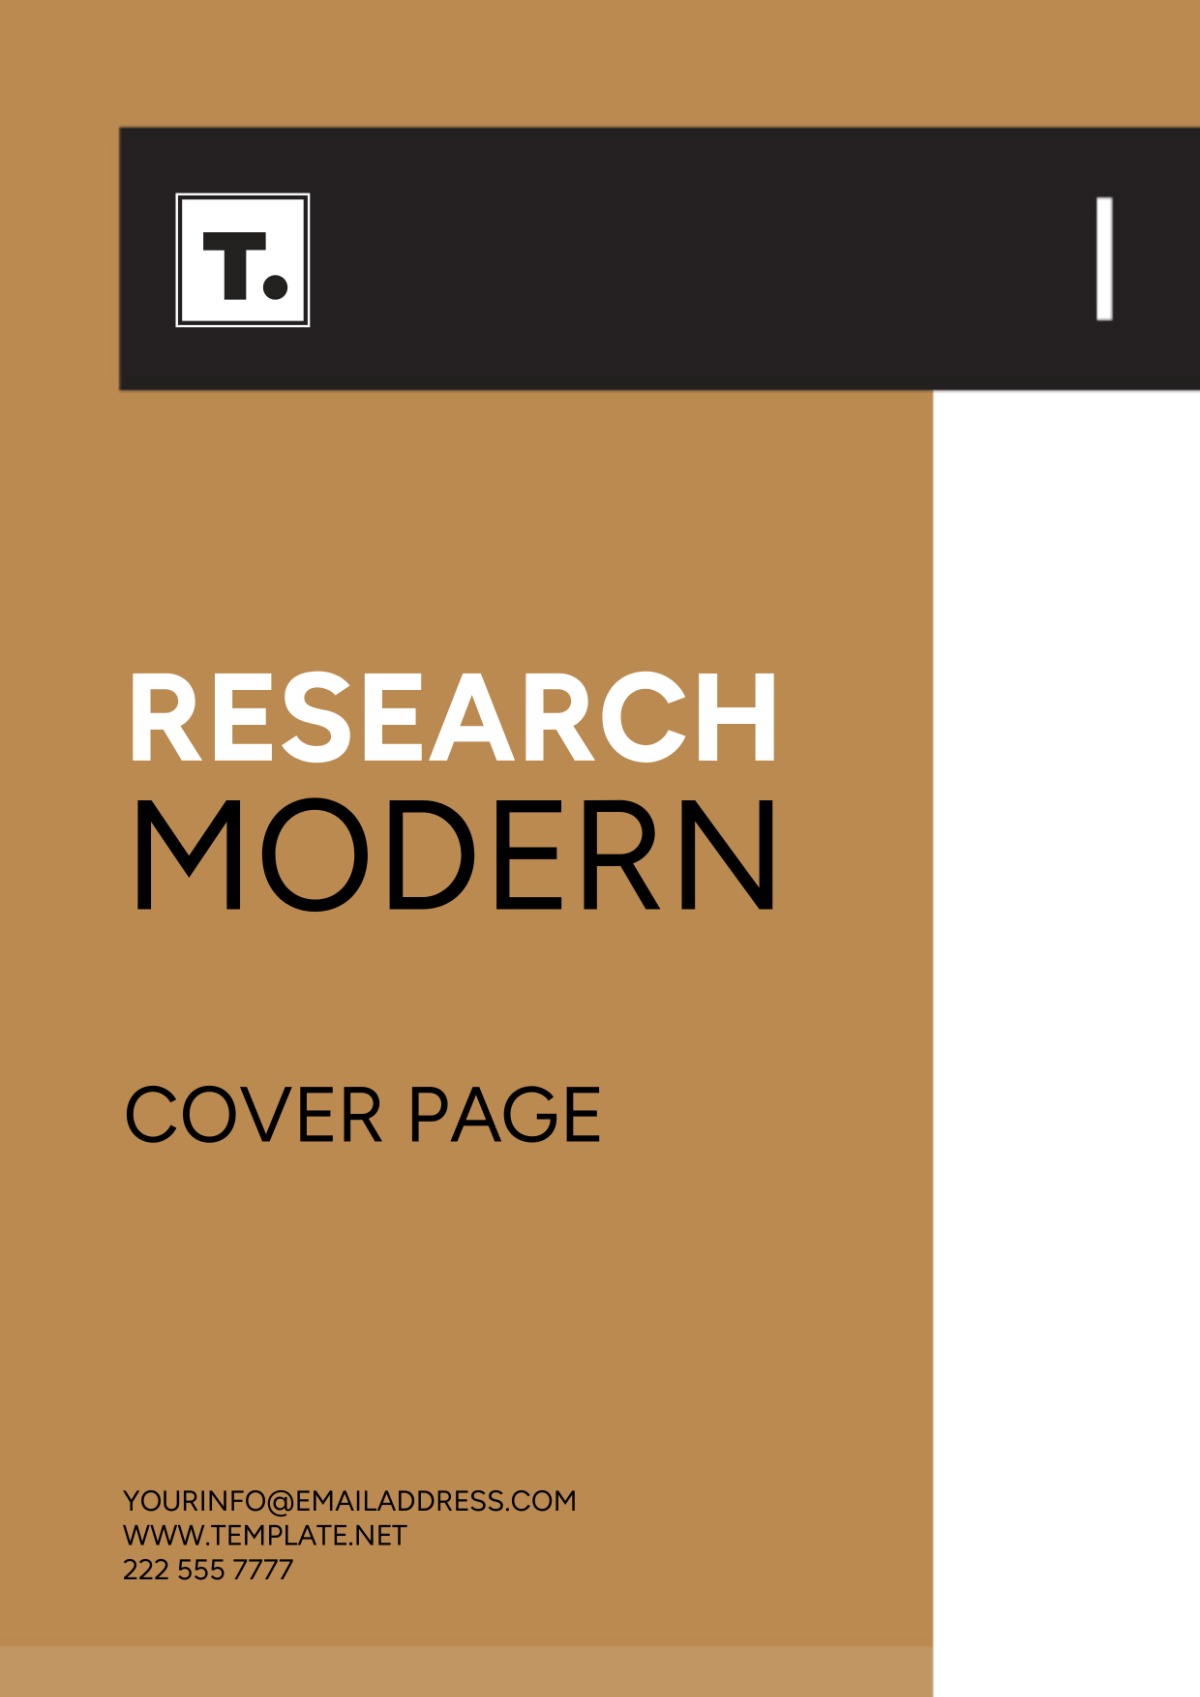 Research Modern Cover Page